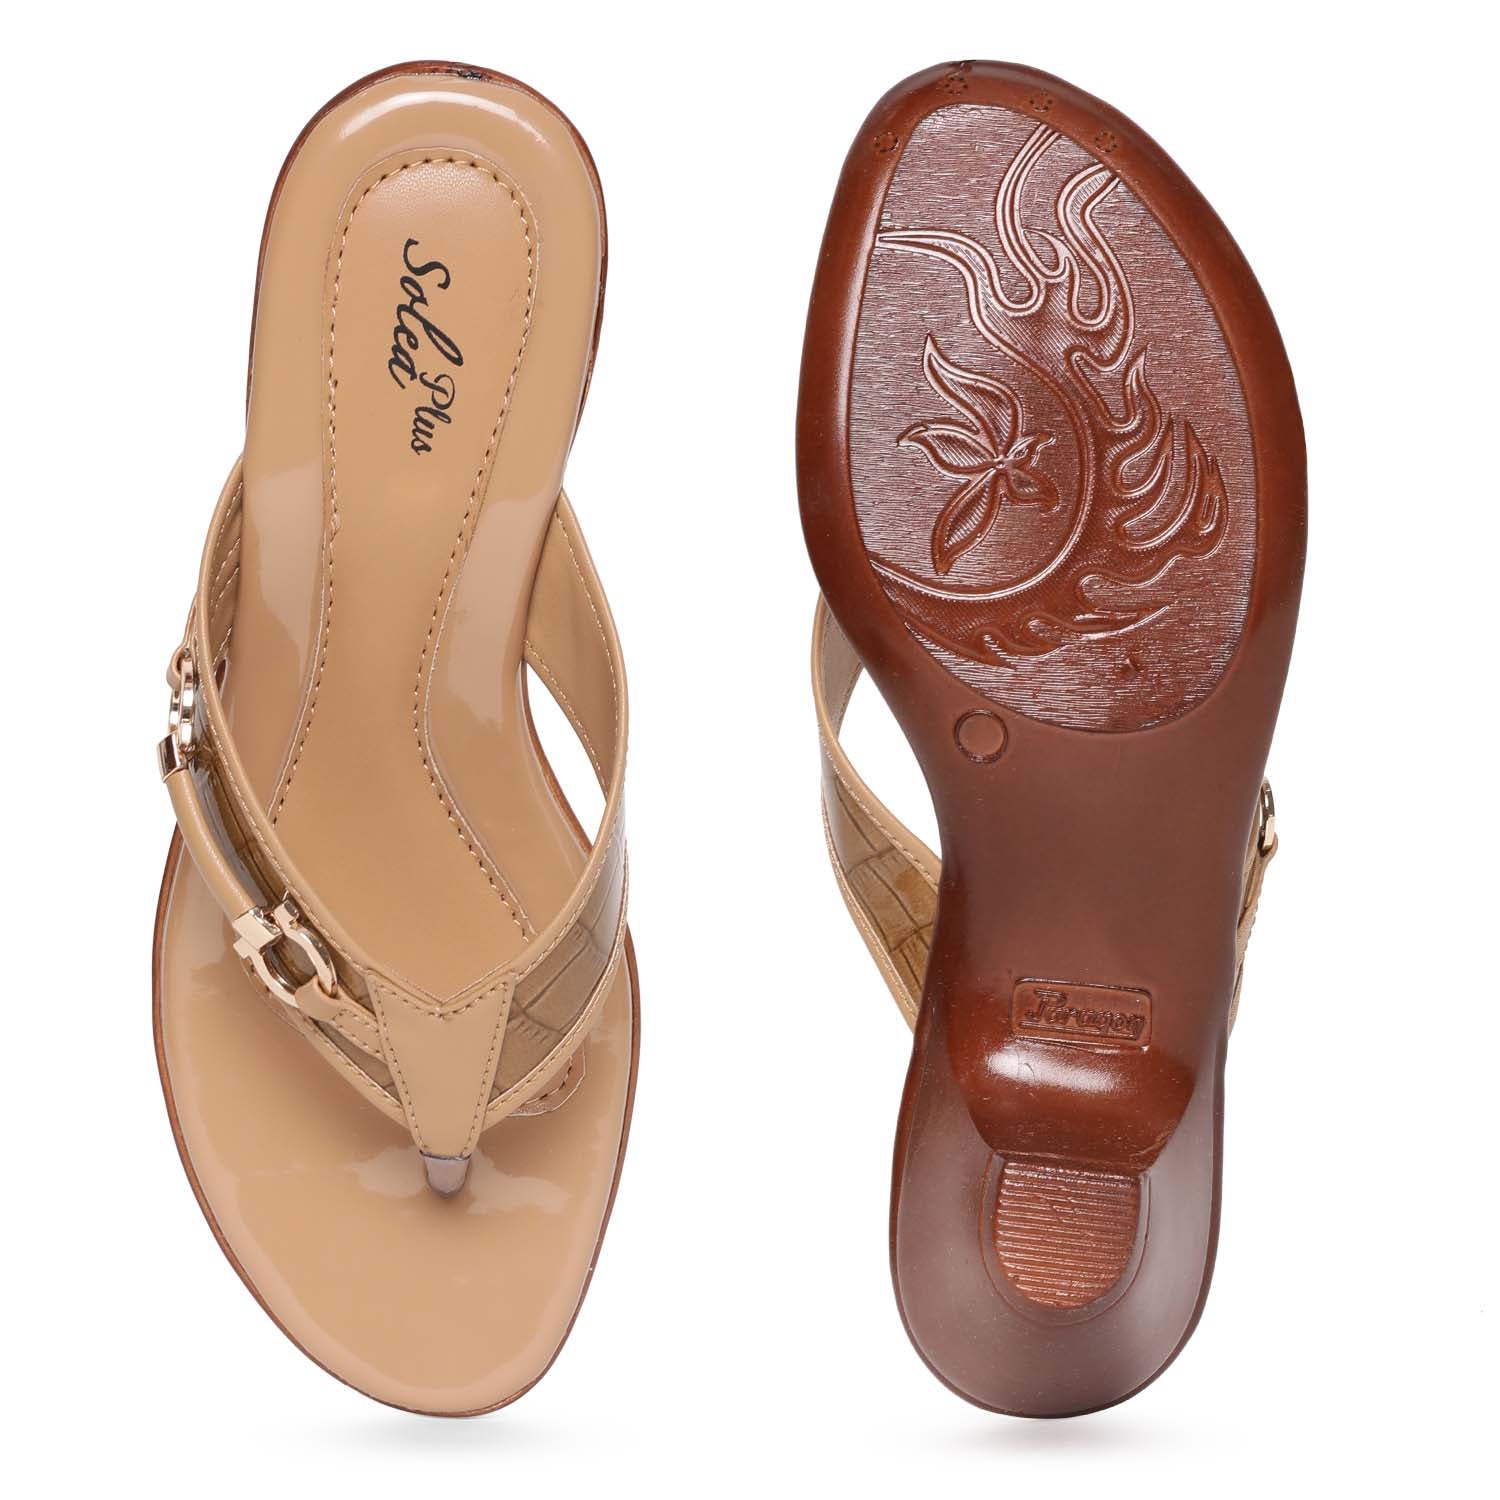 Paragon  R10512L Women Sandals | Casual &amp; Formal Sandals | Stylish, Comfortable &amp; Durable | For Daily &amp; Occasion Wear